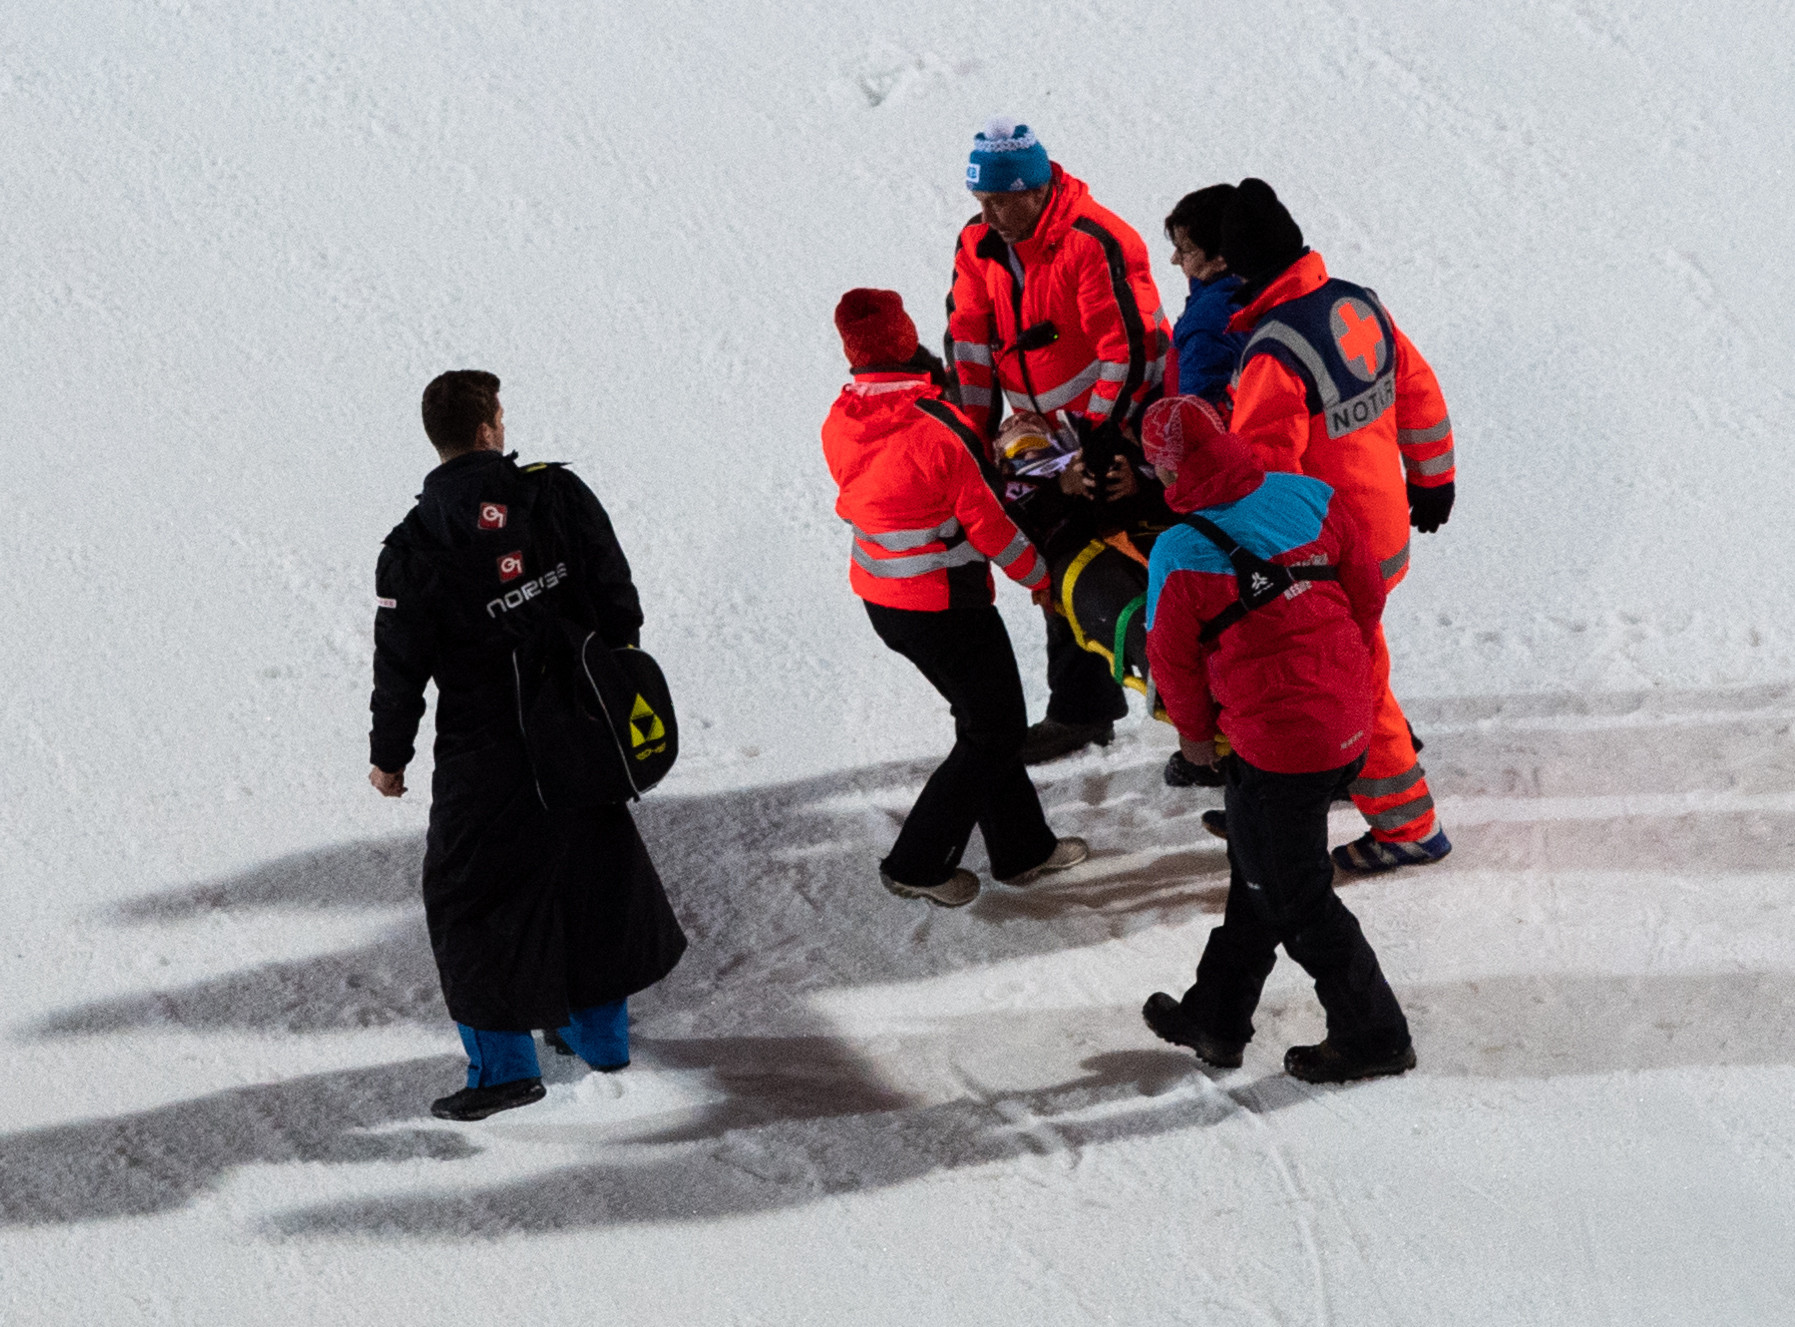 Thomas Aasen Markeng is carried by medics after injuring his knee at a World Cup event in Klingenthal in Germany ©Getty Images